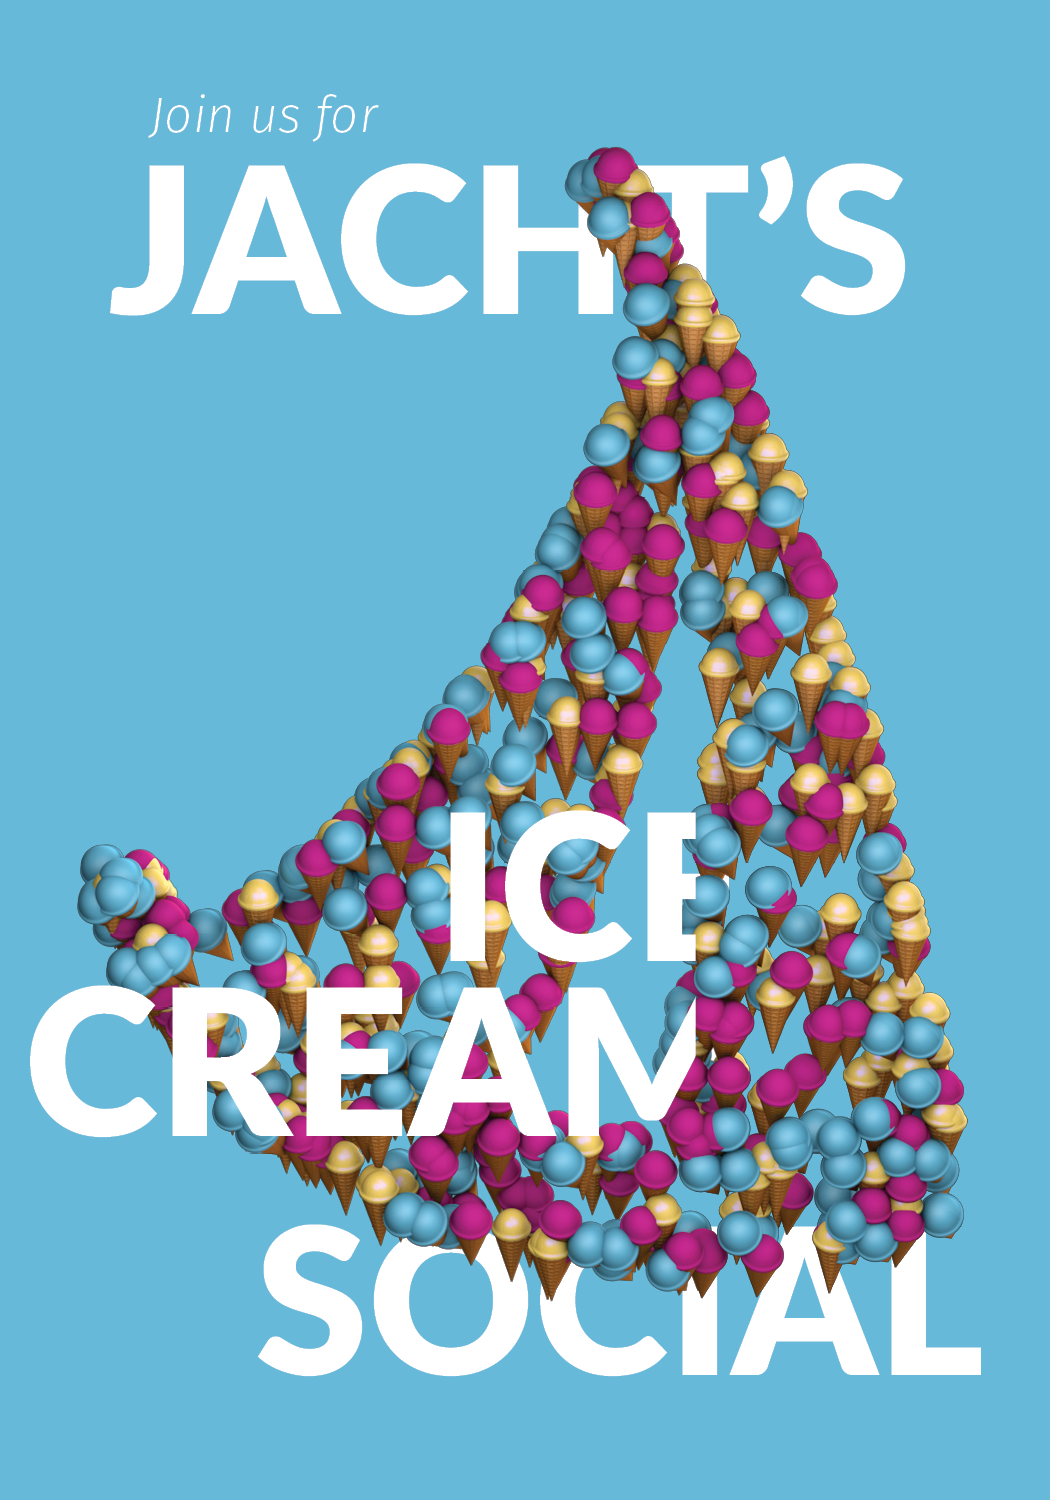 Get a chance to tour Archrival, network with professionals and try Jacht's limited edition 10 Year Anniversary ice cream flavor. 